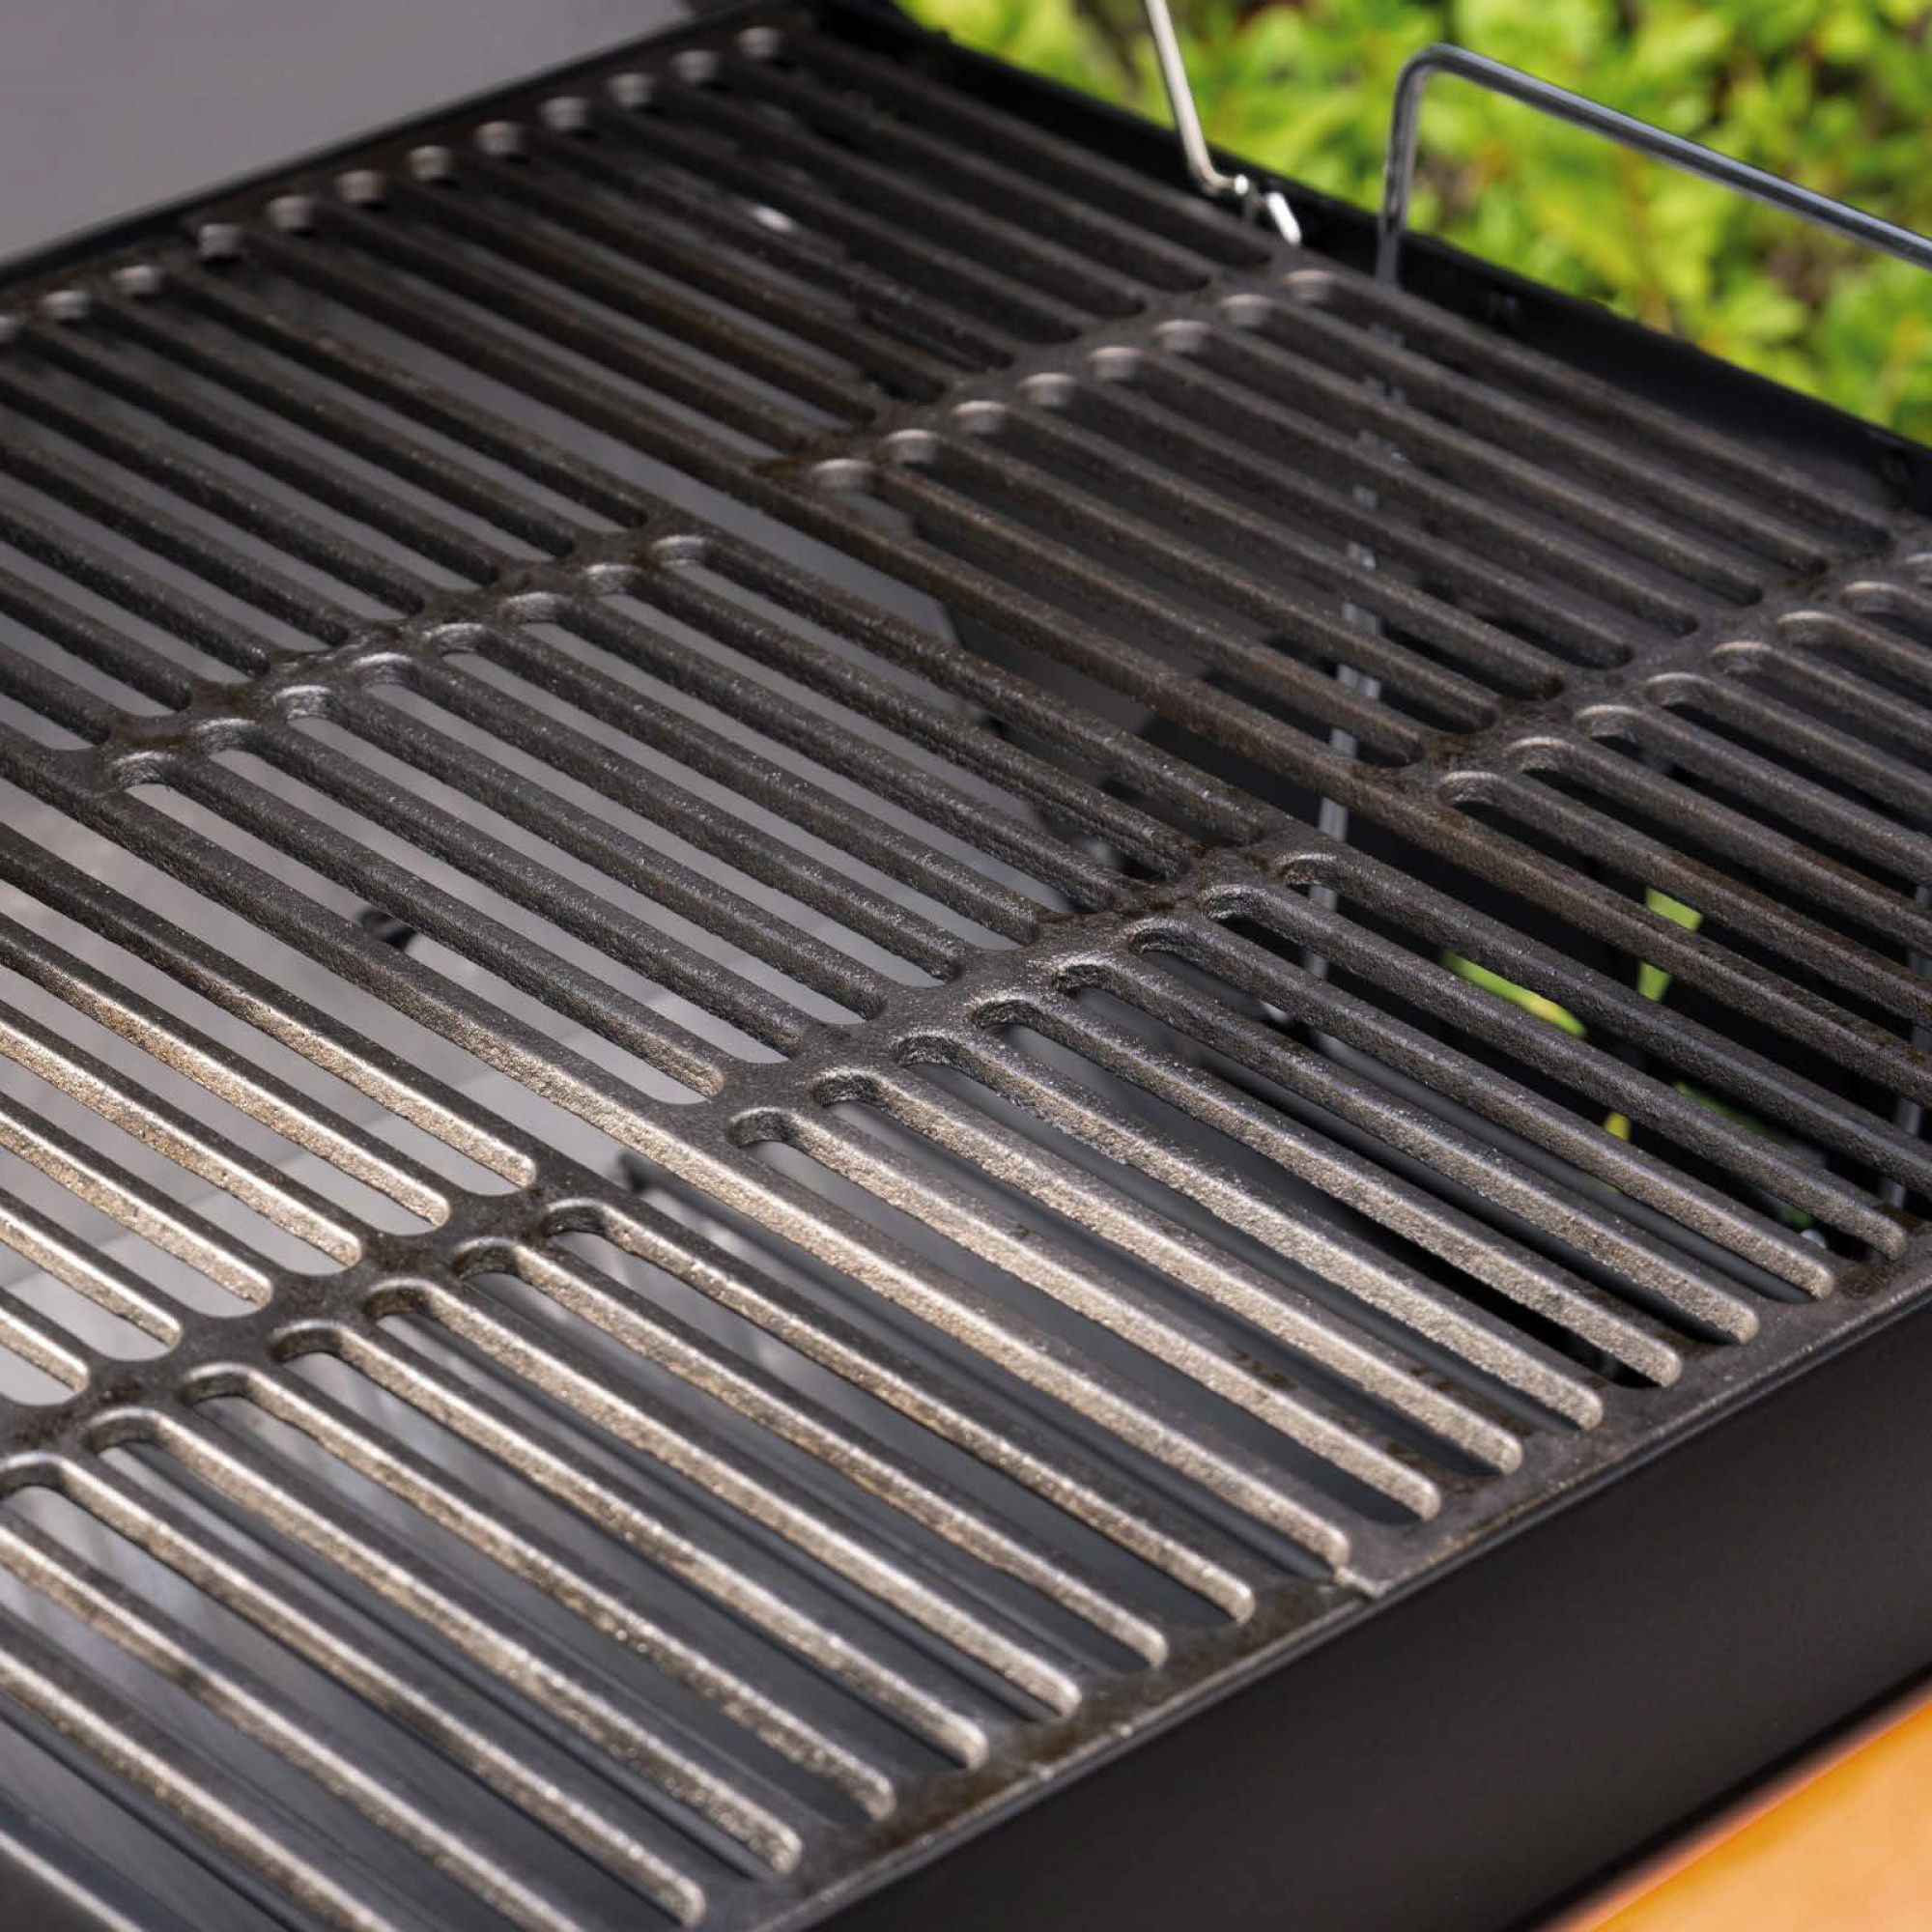 Char-Griller Wrangler Outdoor Cooking Heavy Duty Steel Charcoal Barbecue Grill - image 5 of 16